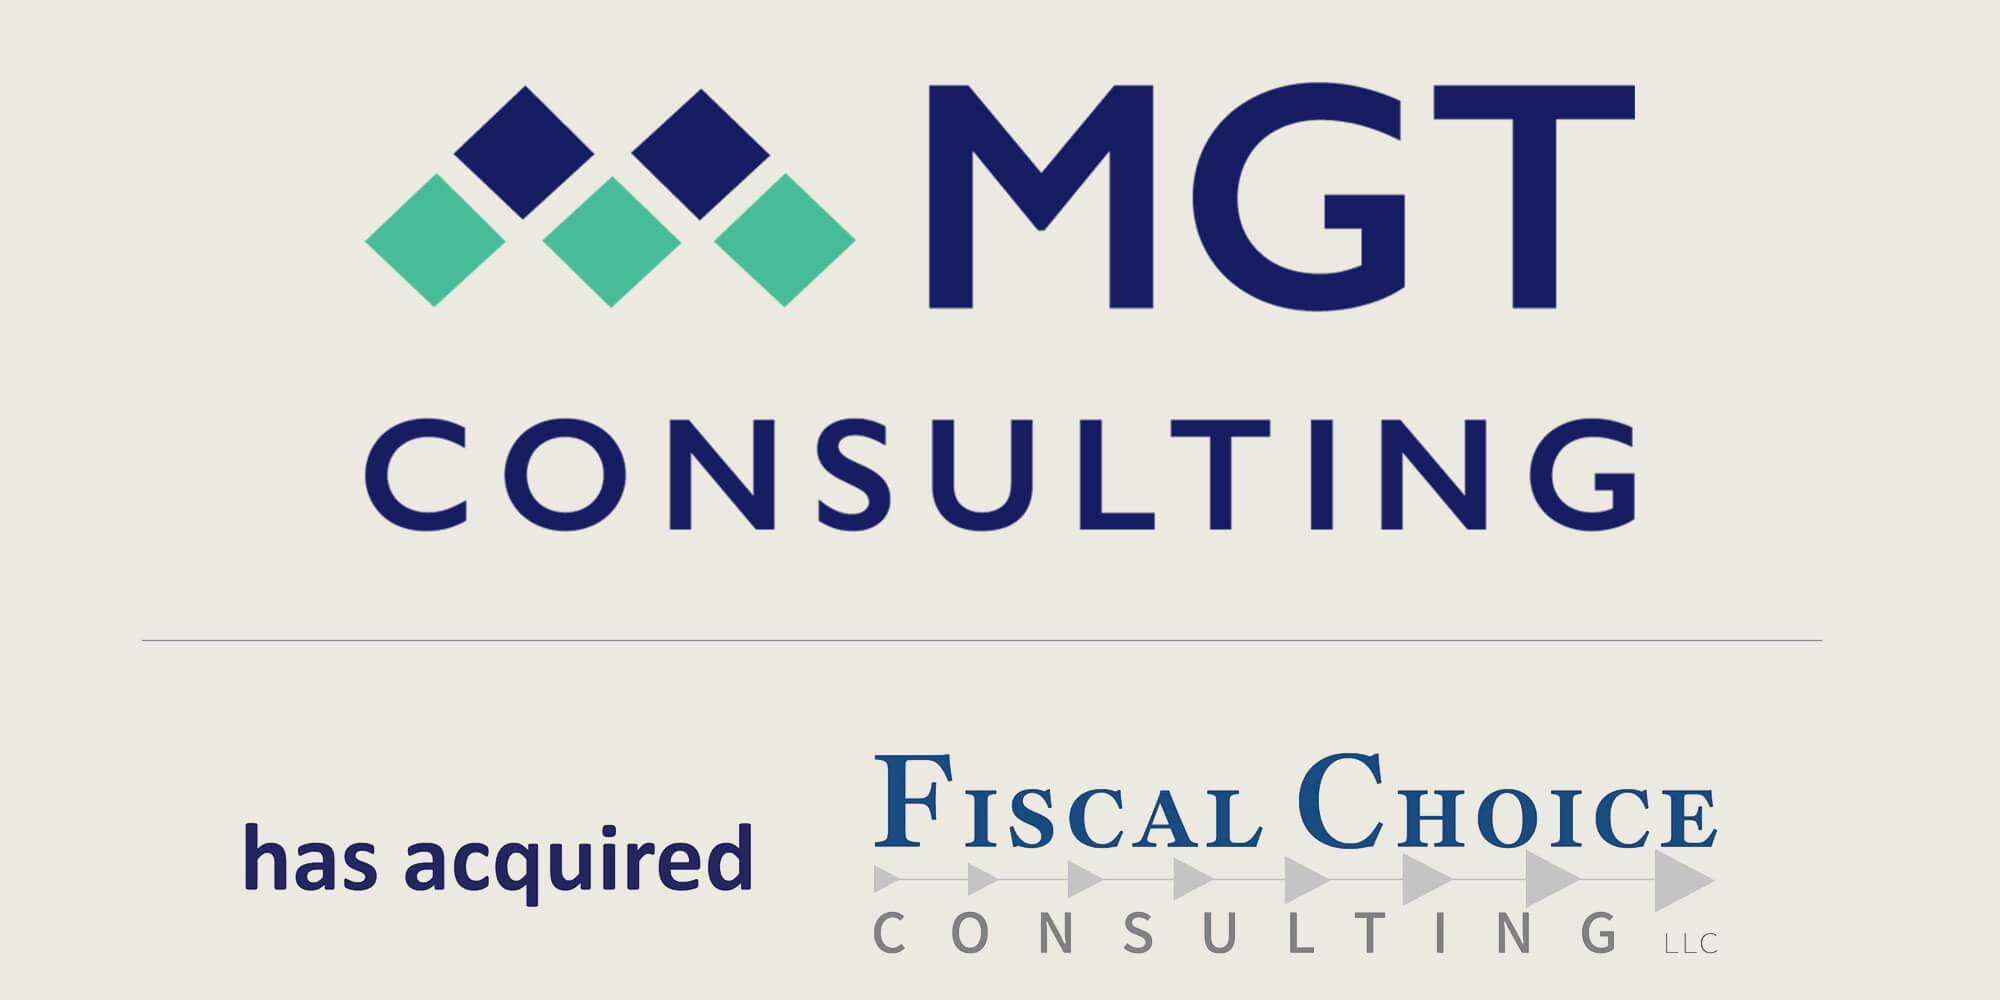 MGT Acquires Fiscal Choice, a Financial Consulting Firm